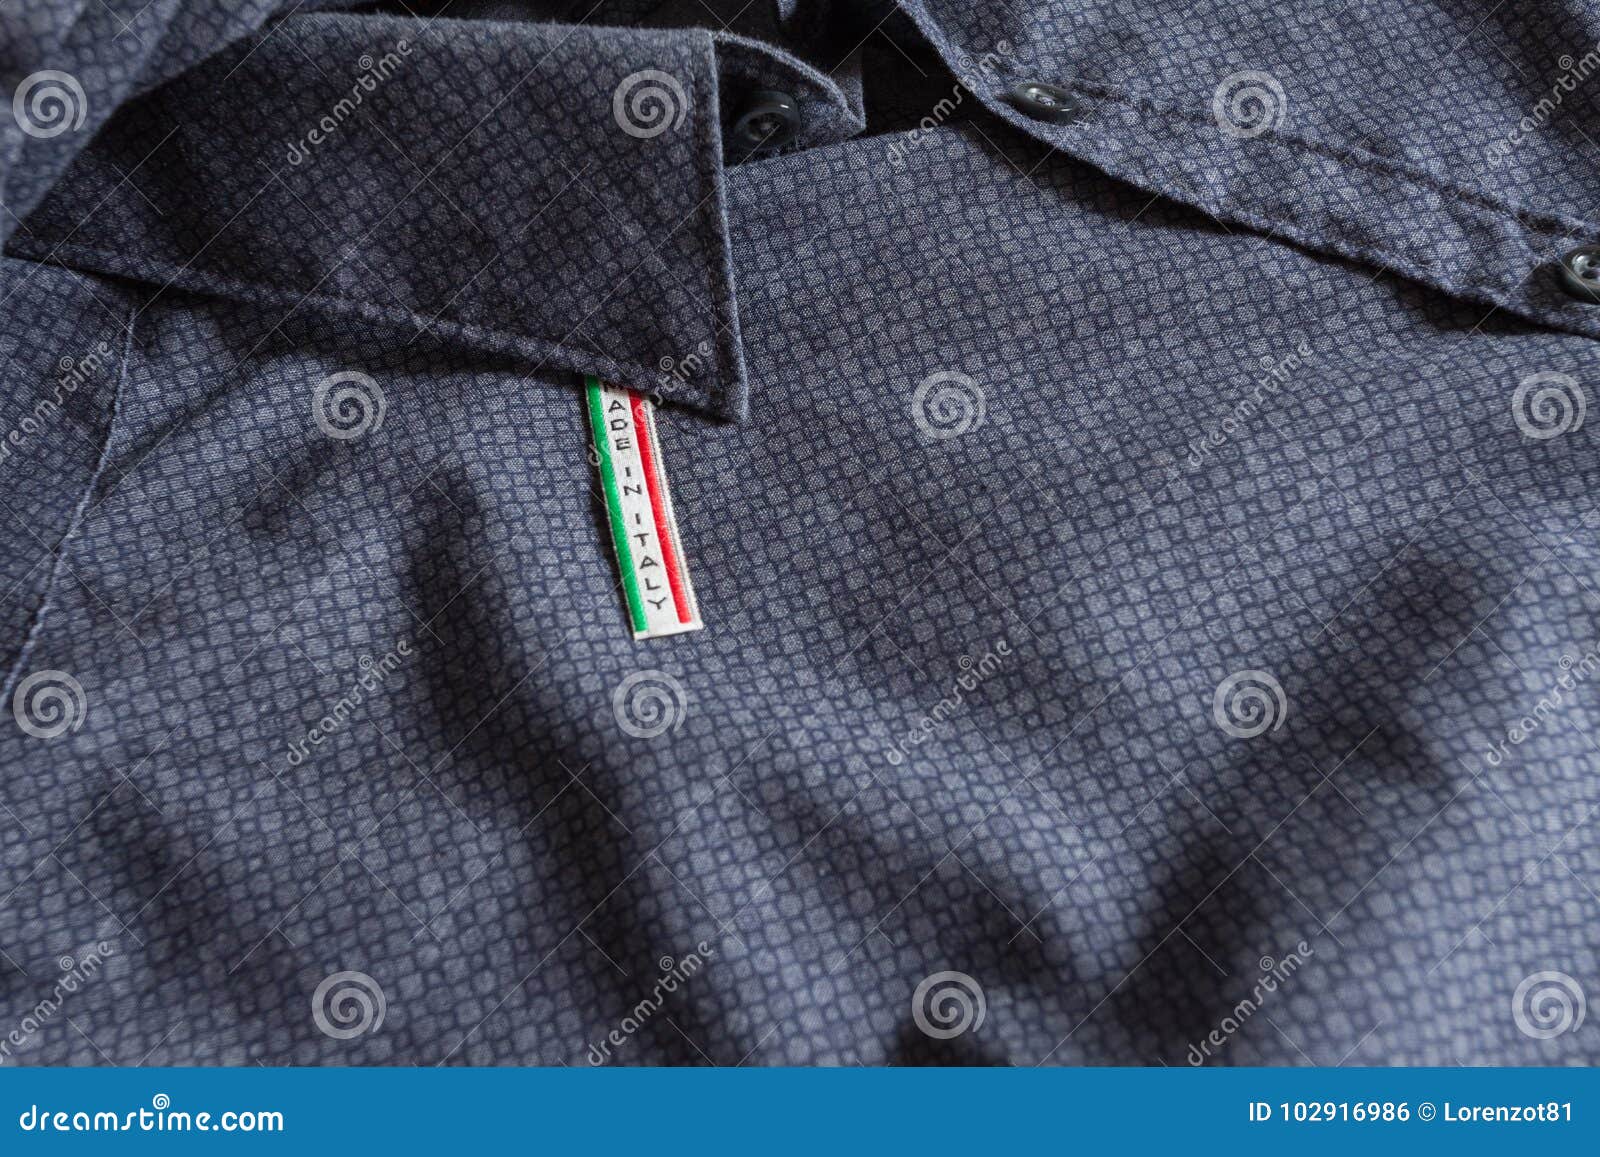 Made in Italy Label on Blue Cotton Shirt Stock Photo - Image of fashion ...